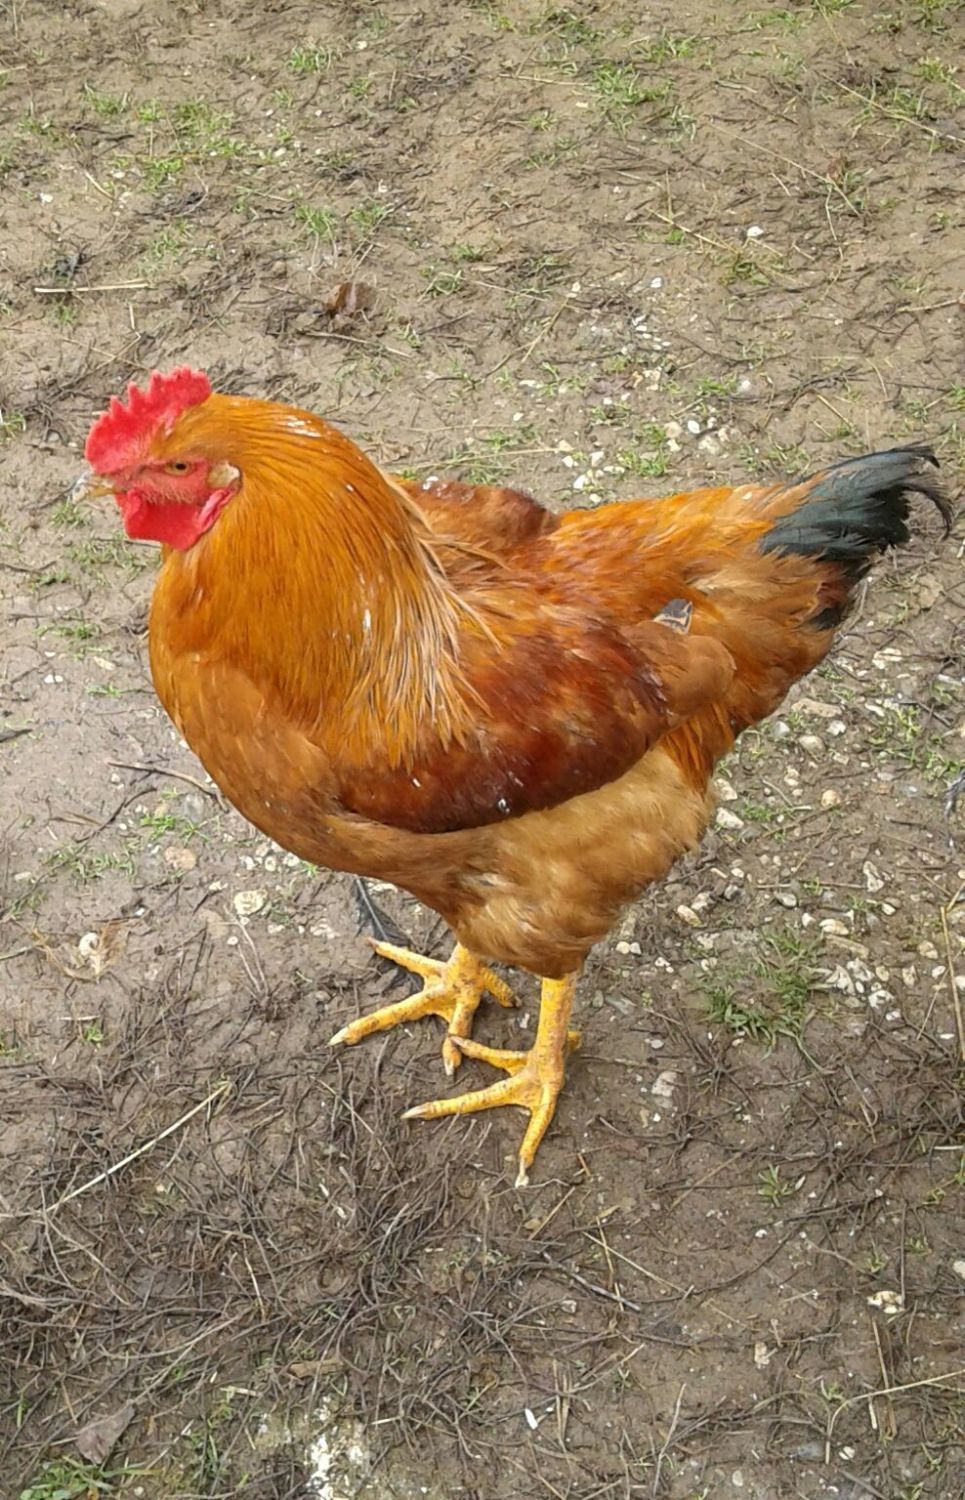 is he a new hampshire rooster?